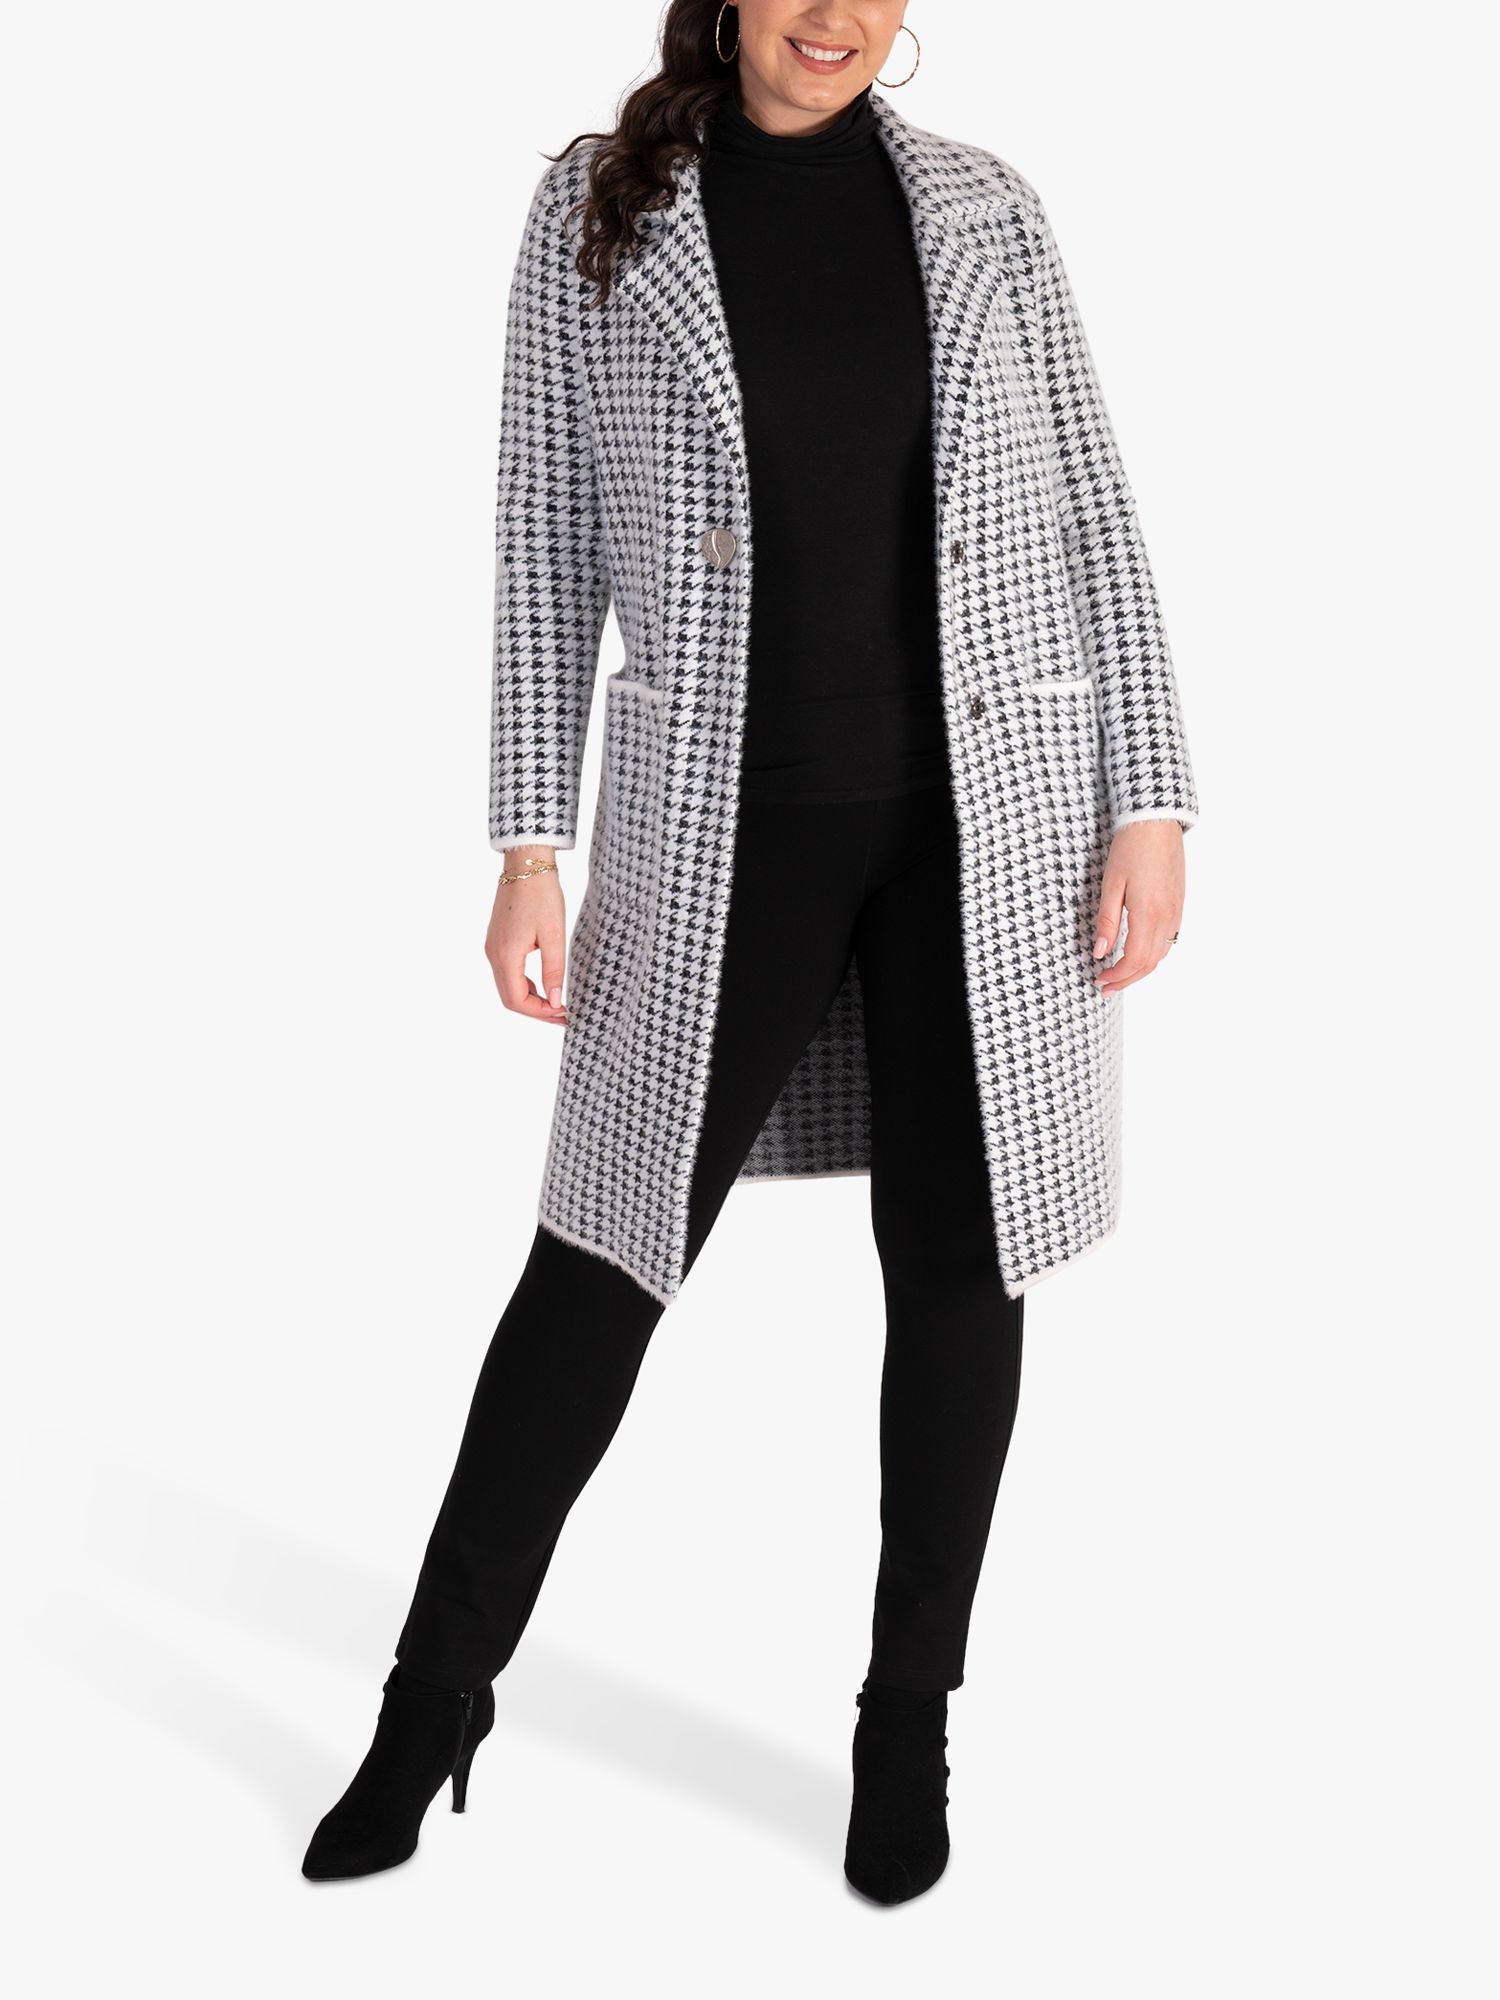 chesca Houndstooth Knee Length Coat, White/Black at John Lewis & Partners